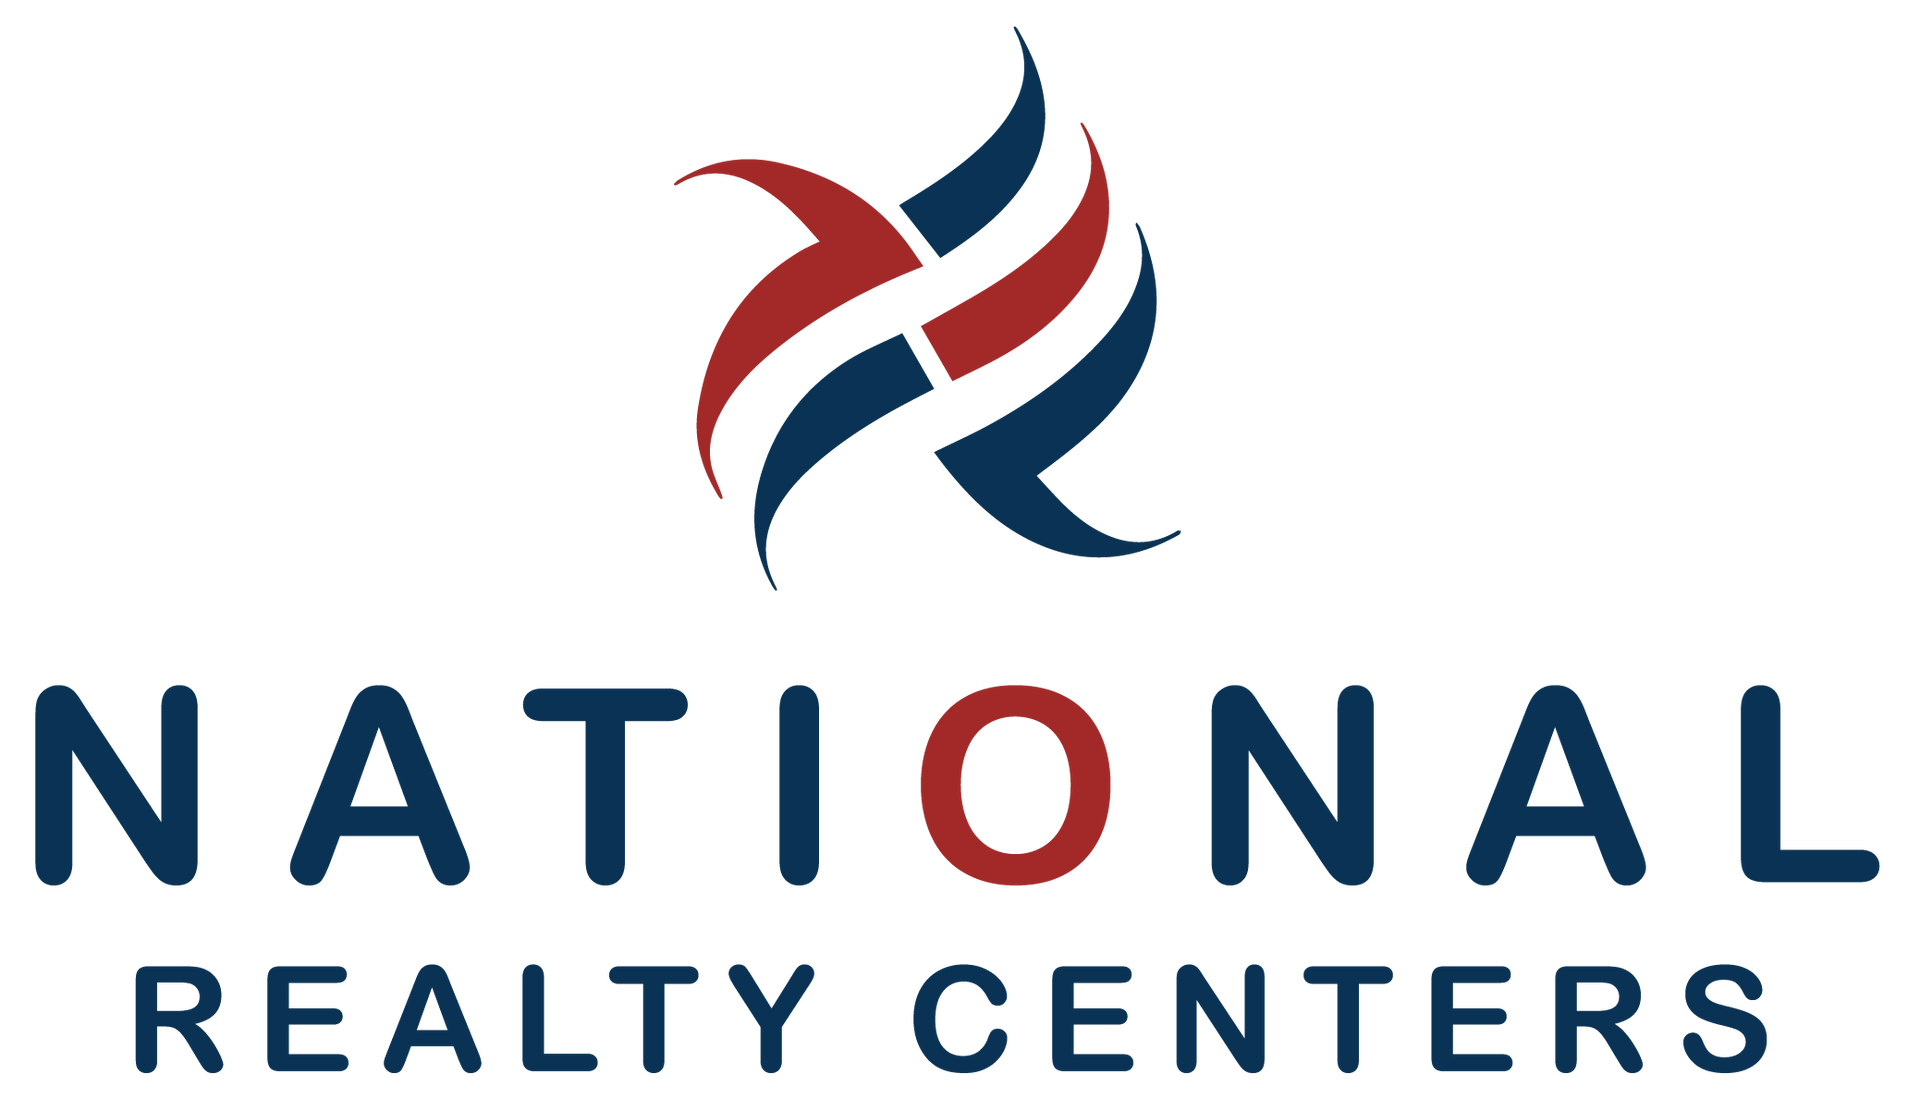 the logo for national realty centers has a red , white and blue swirl on it .